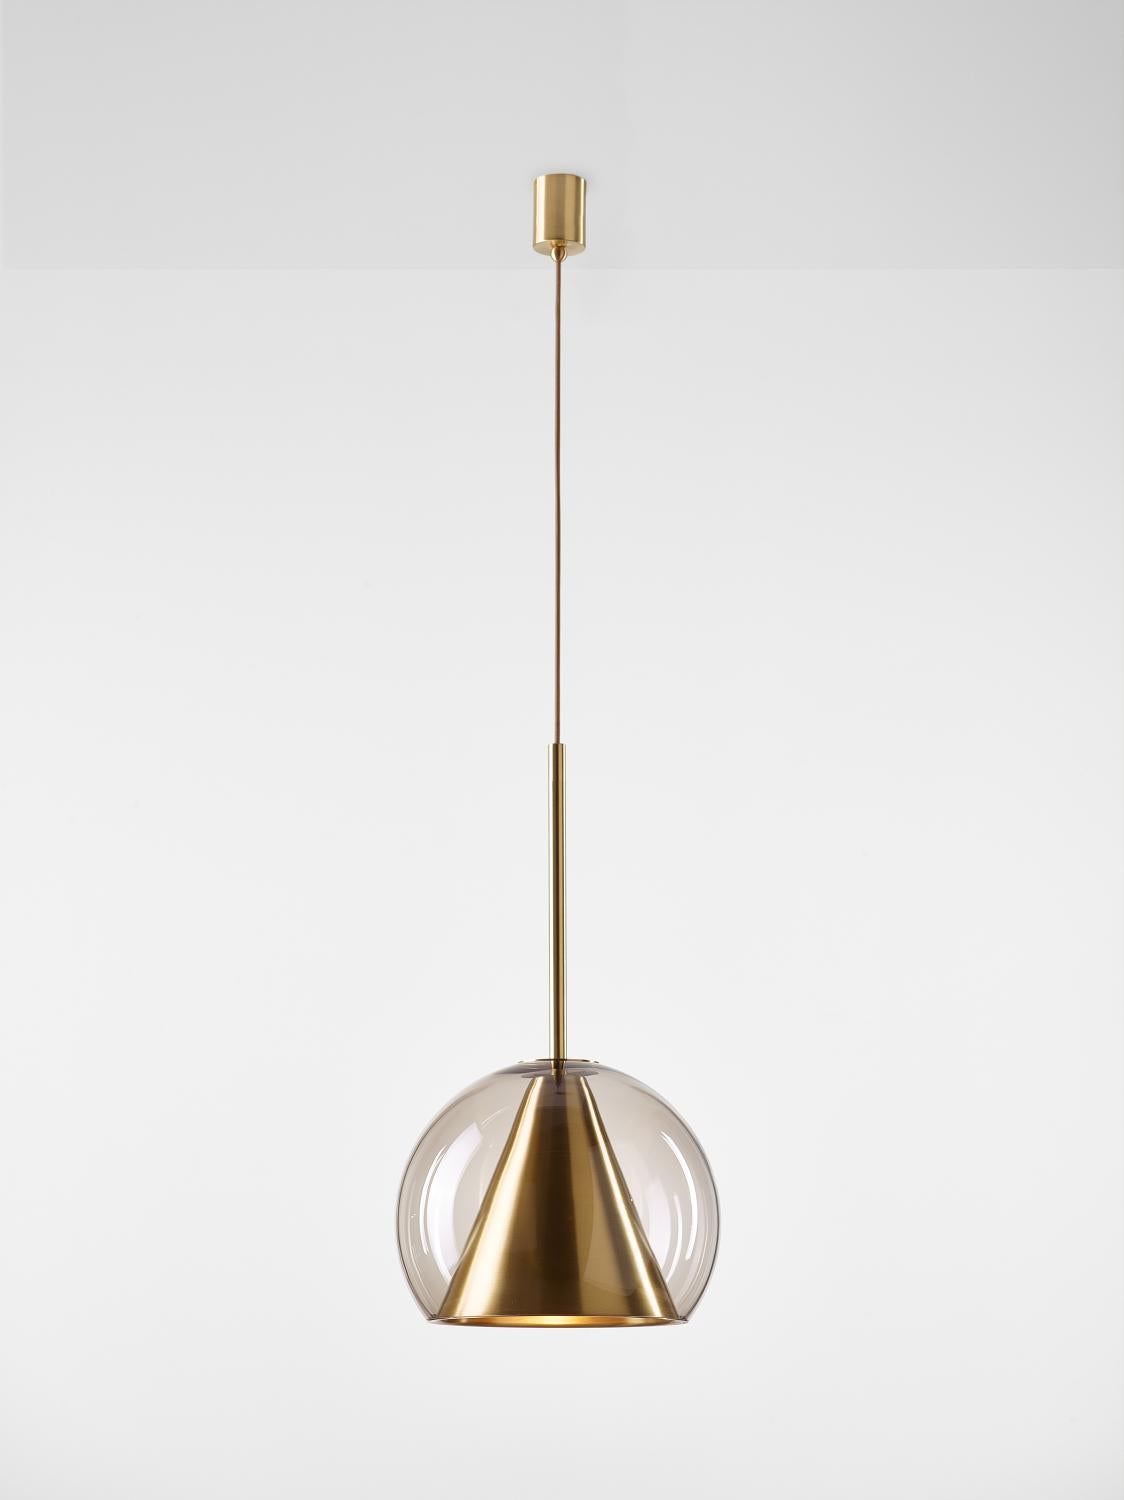 Big Crystal Clear Kono pendant light by Dechem Studio
Dimensions: D 35 x H 75 cm
Materials: Brass, Glass.
Also Available: Different finishes and colours available.

This collection of suspended light fixtures combines the elementary geometric